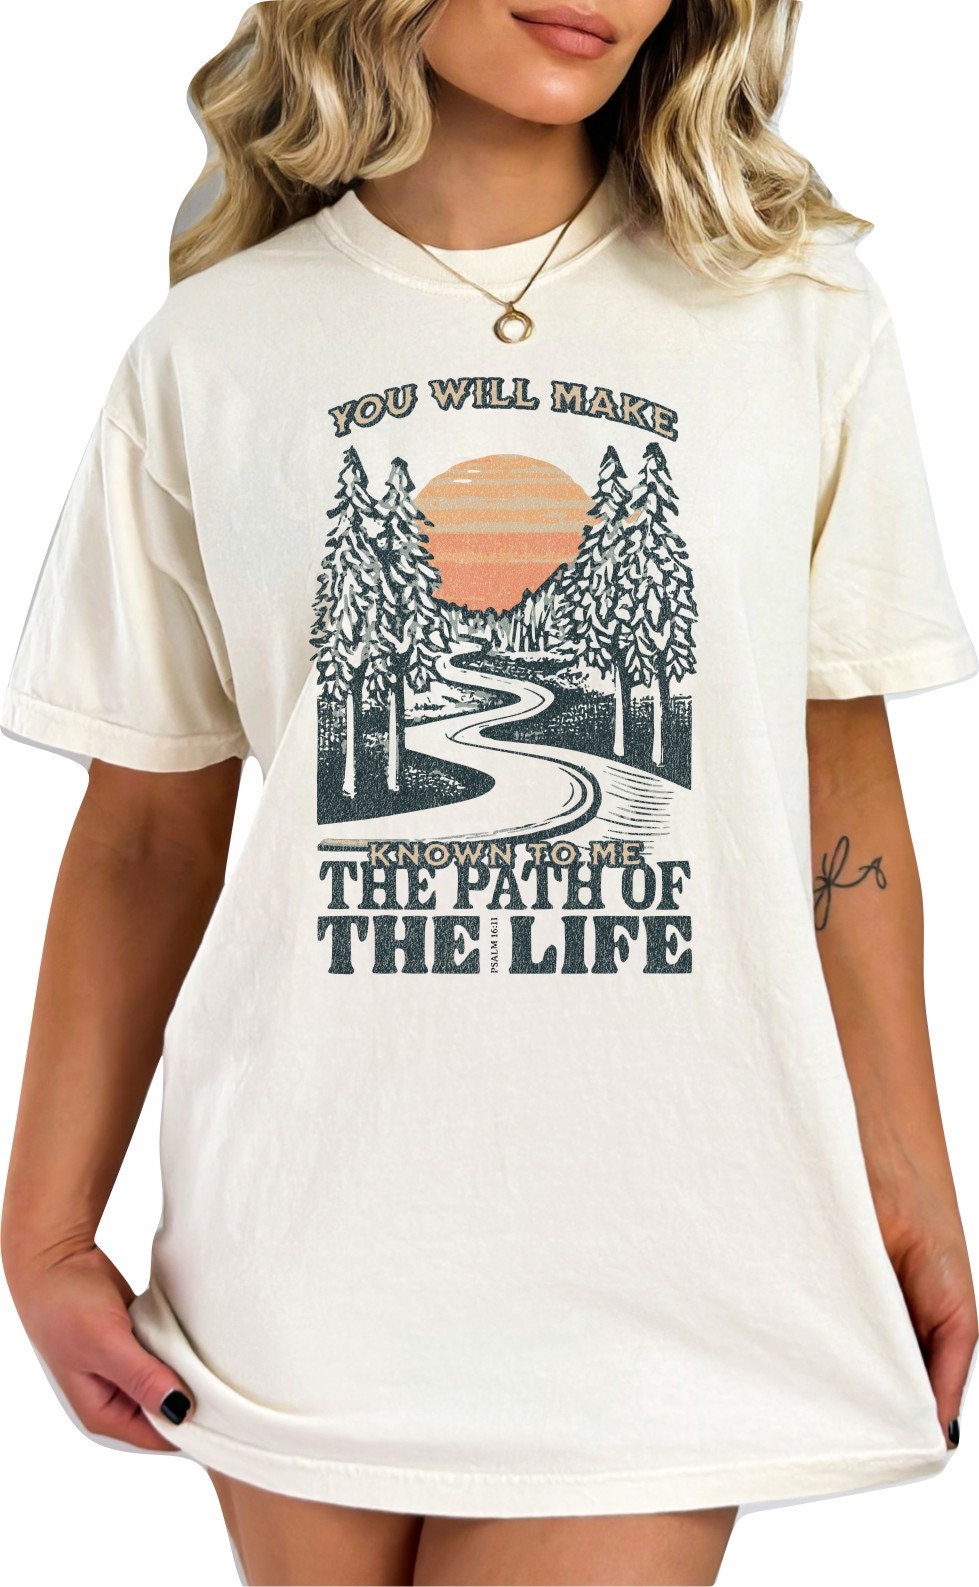 Christian Shirts Religious Tshirt Christian T Shirts Boho Christian Shirt Bible Shirt You Will Make Known to Me the Path of The Life Shirt